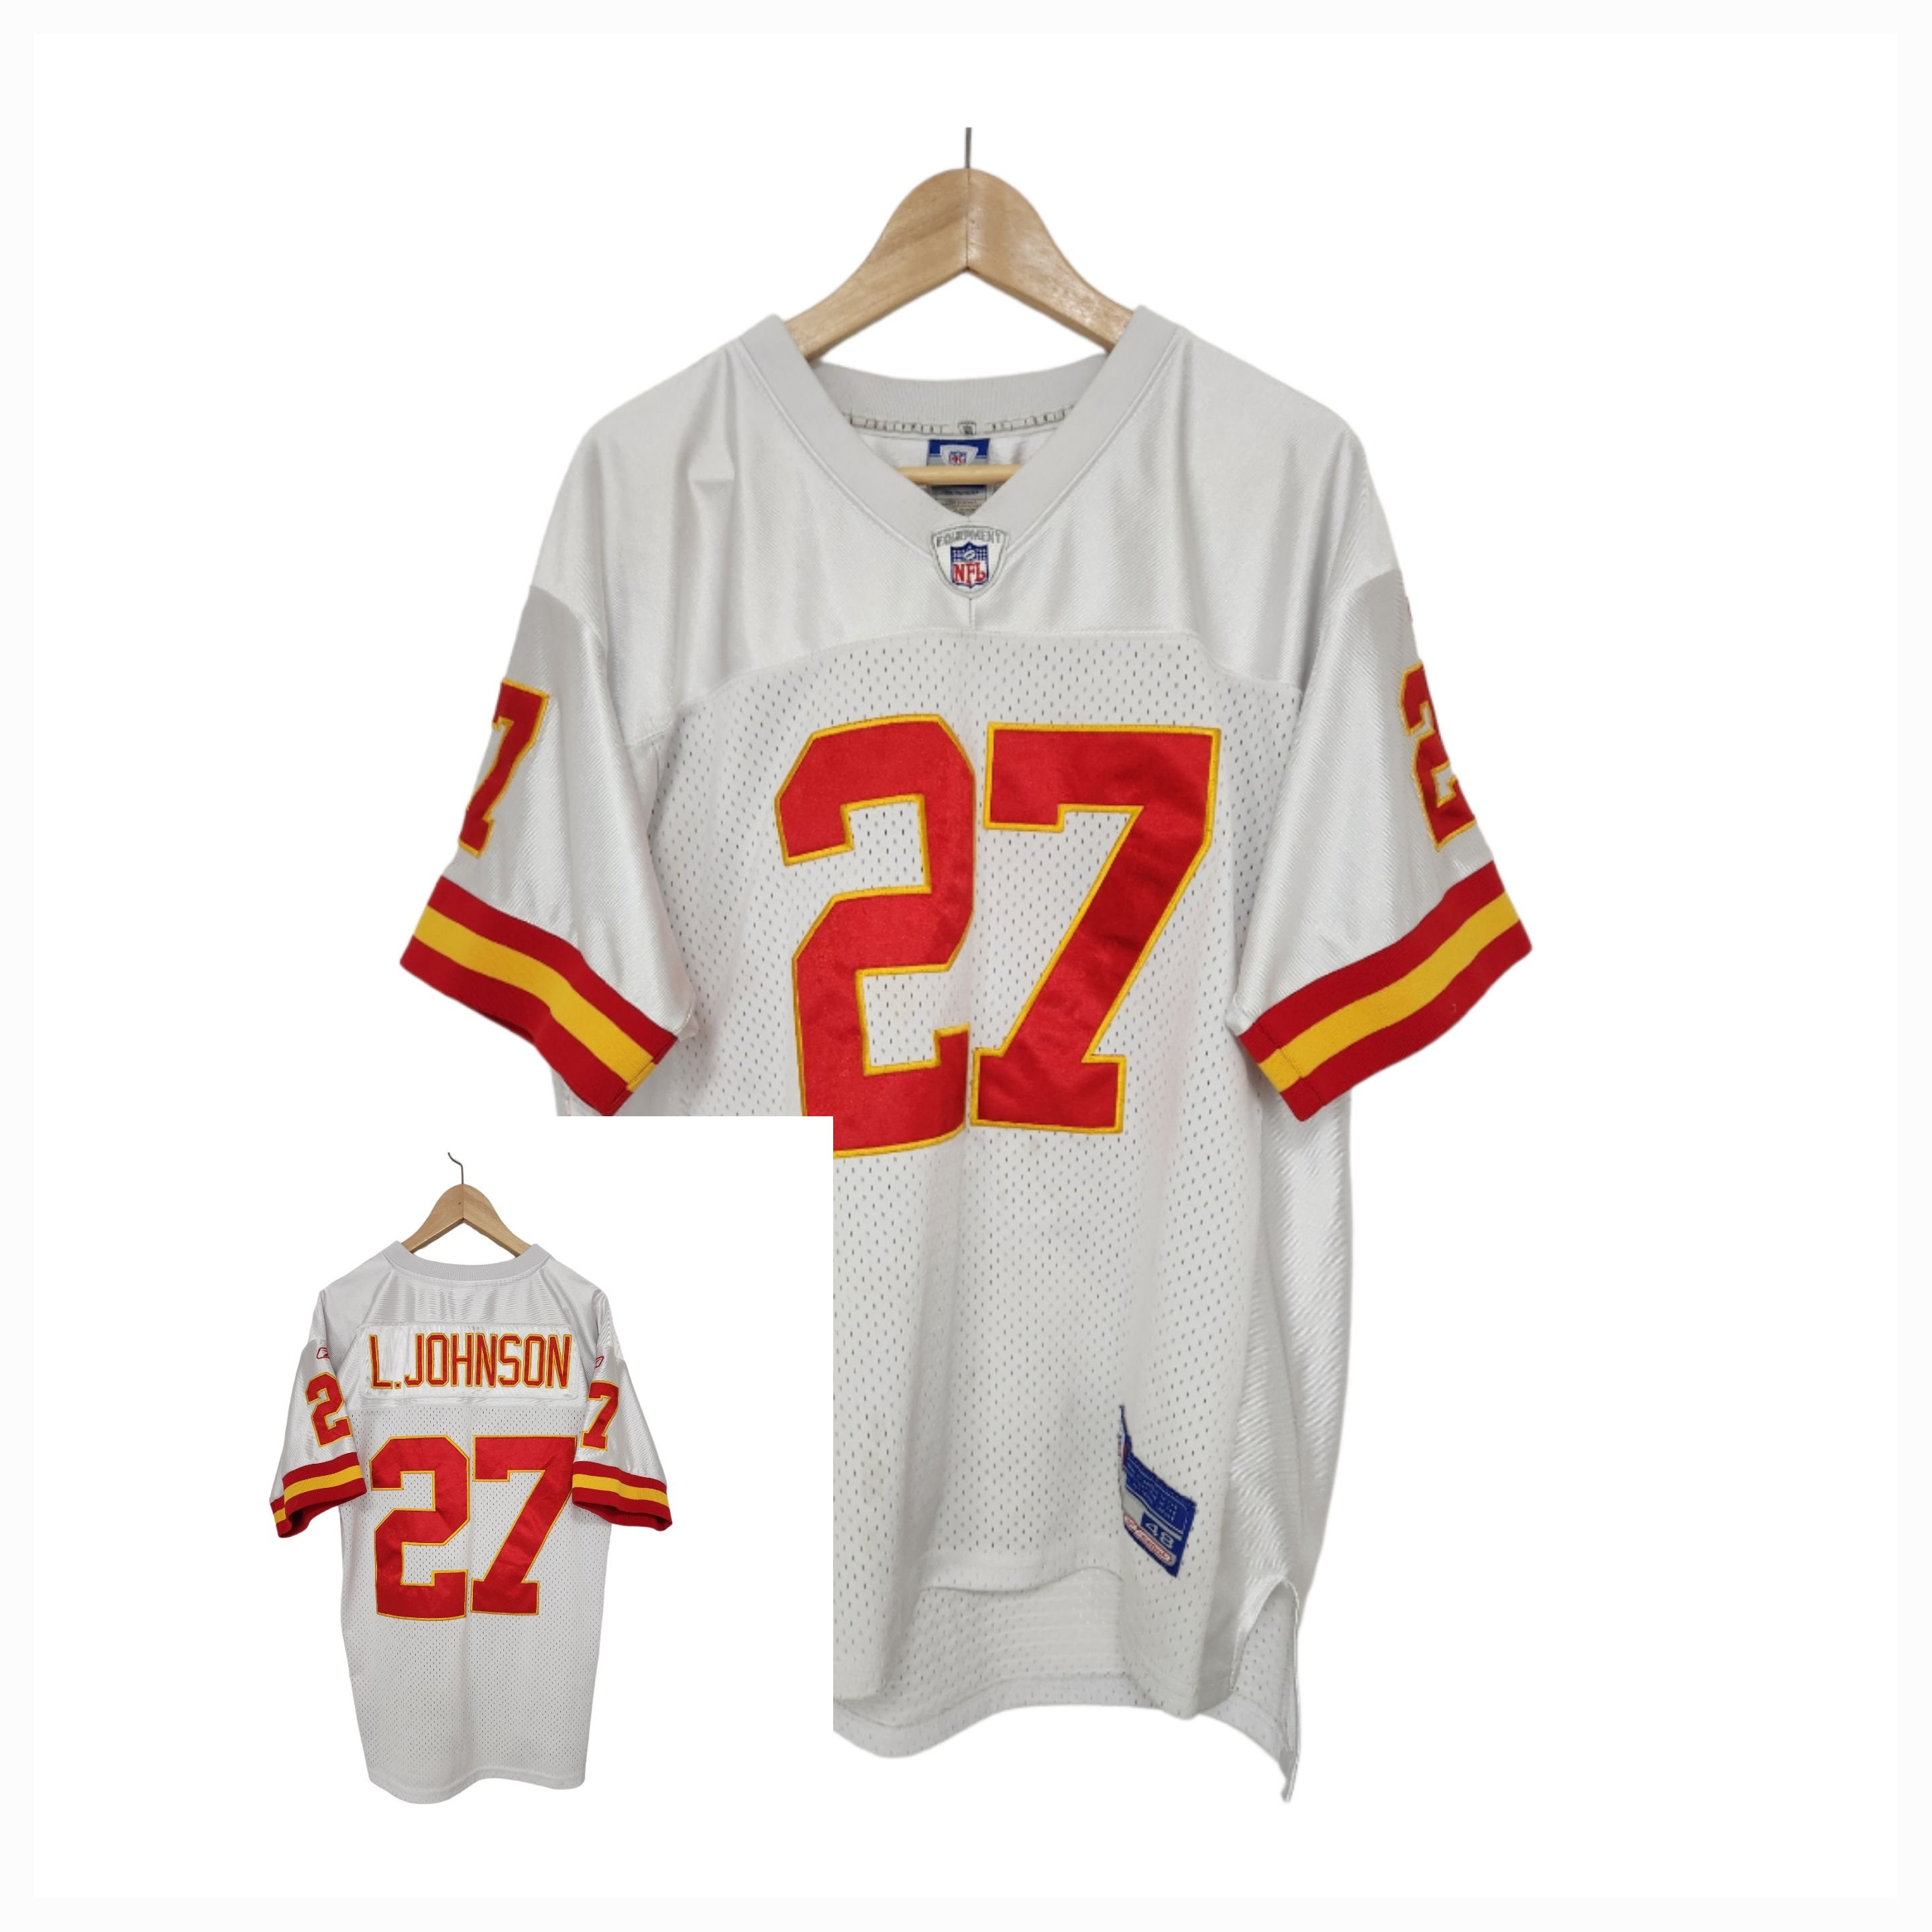 Buy Nfl Football Jersey Online In India -  India